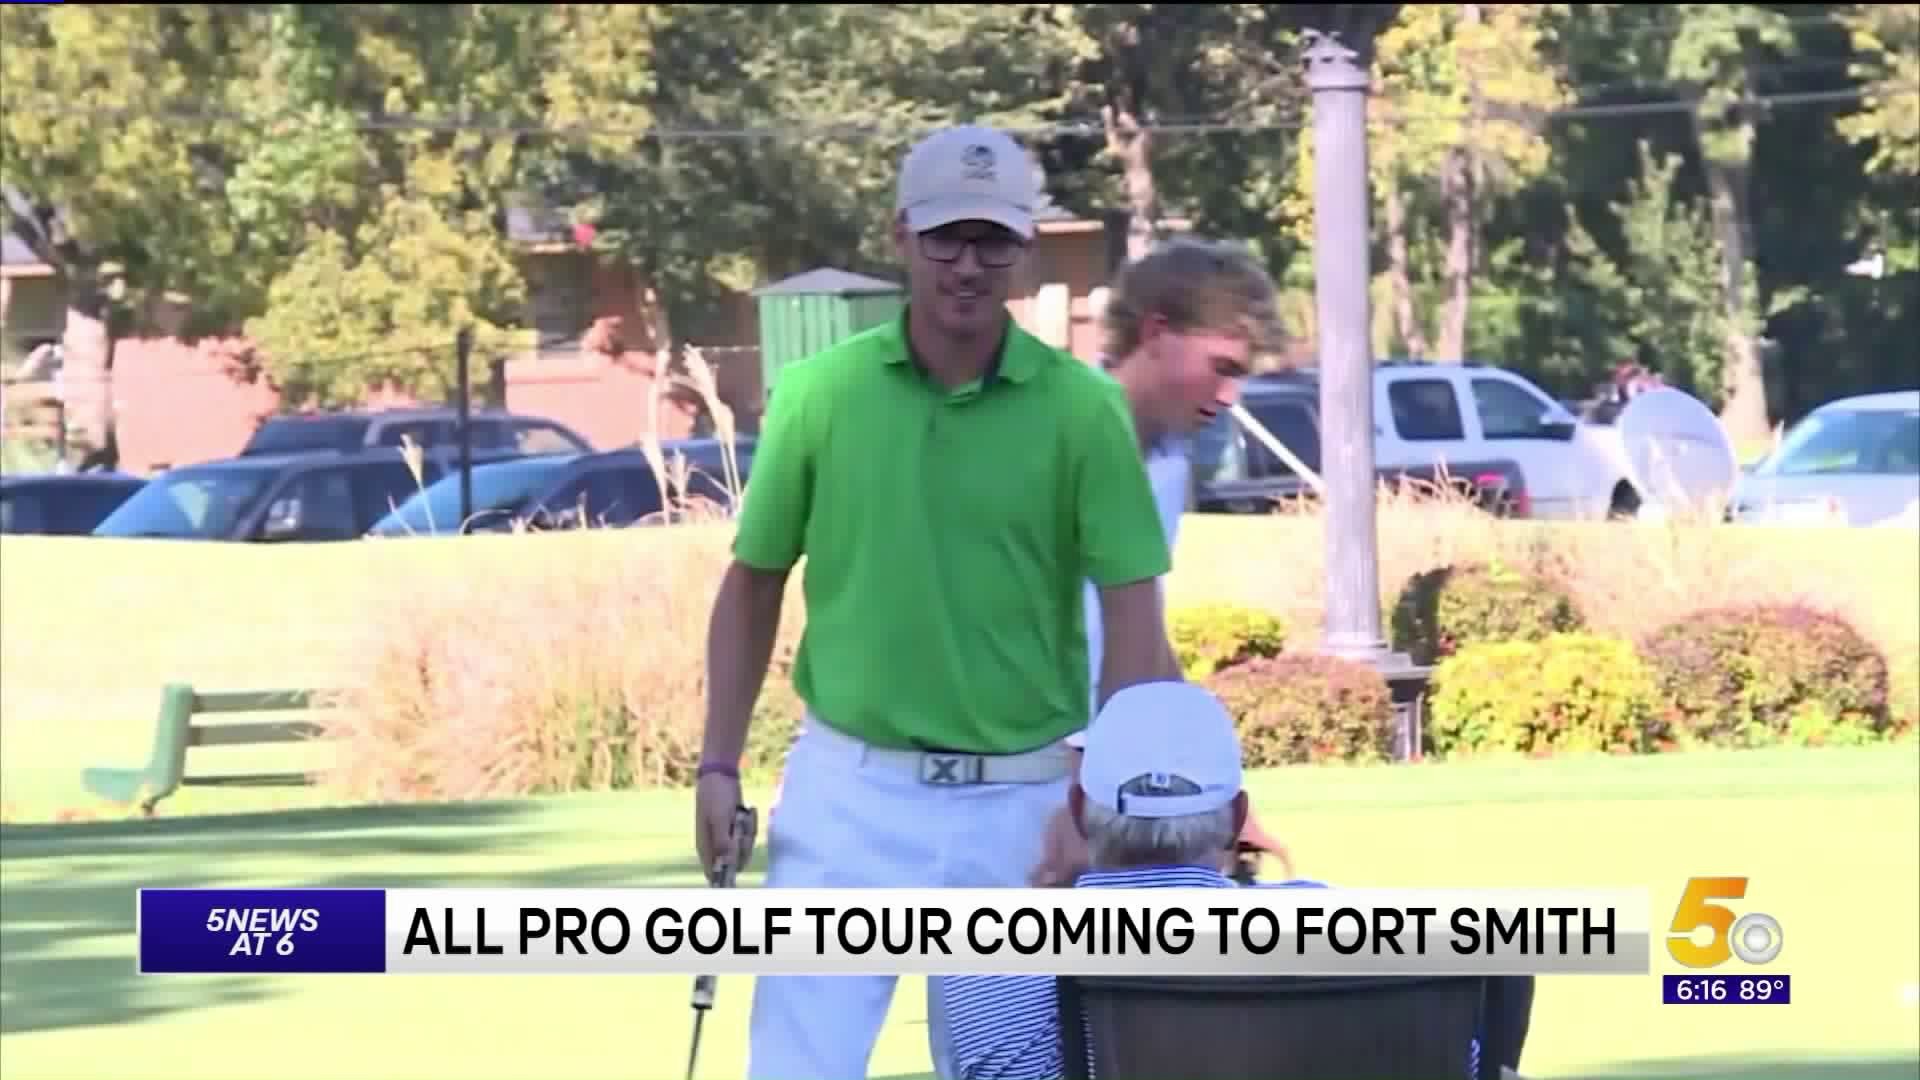 All Pro Golf Tour Coming to Fort Smith